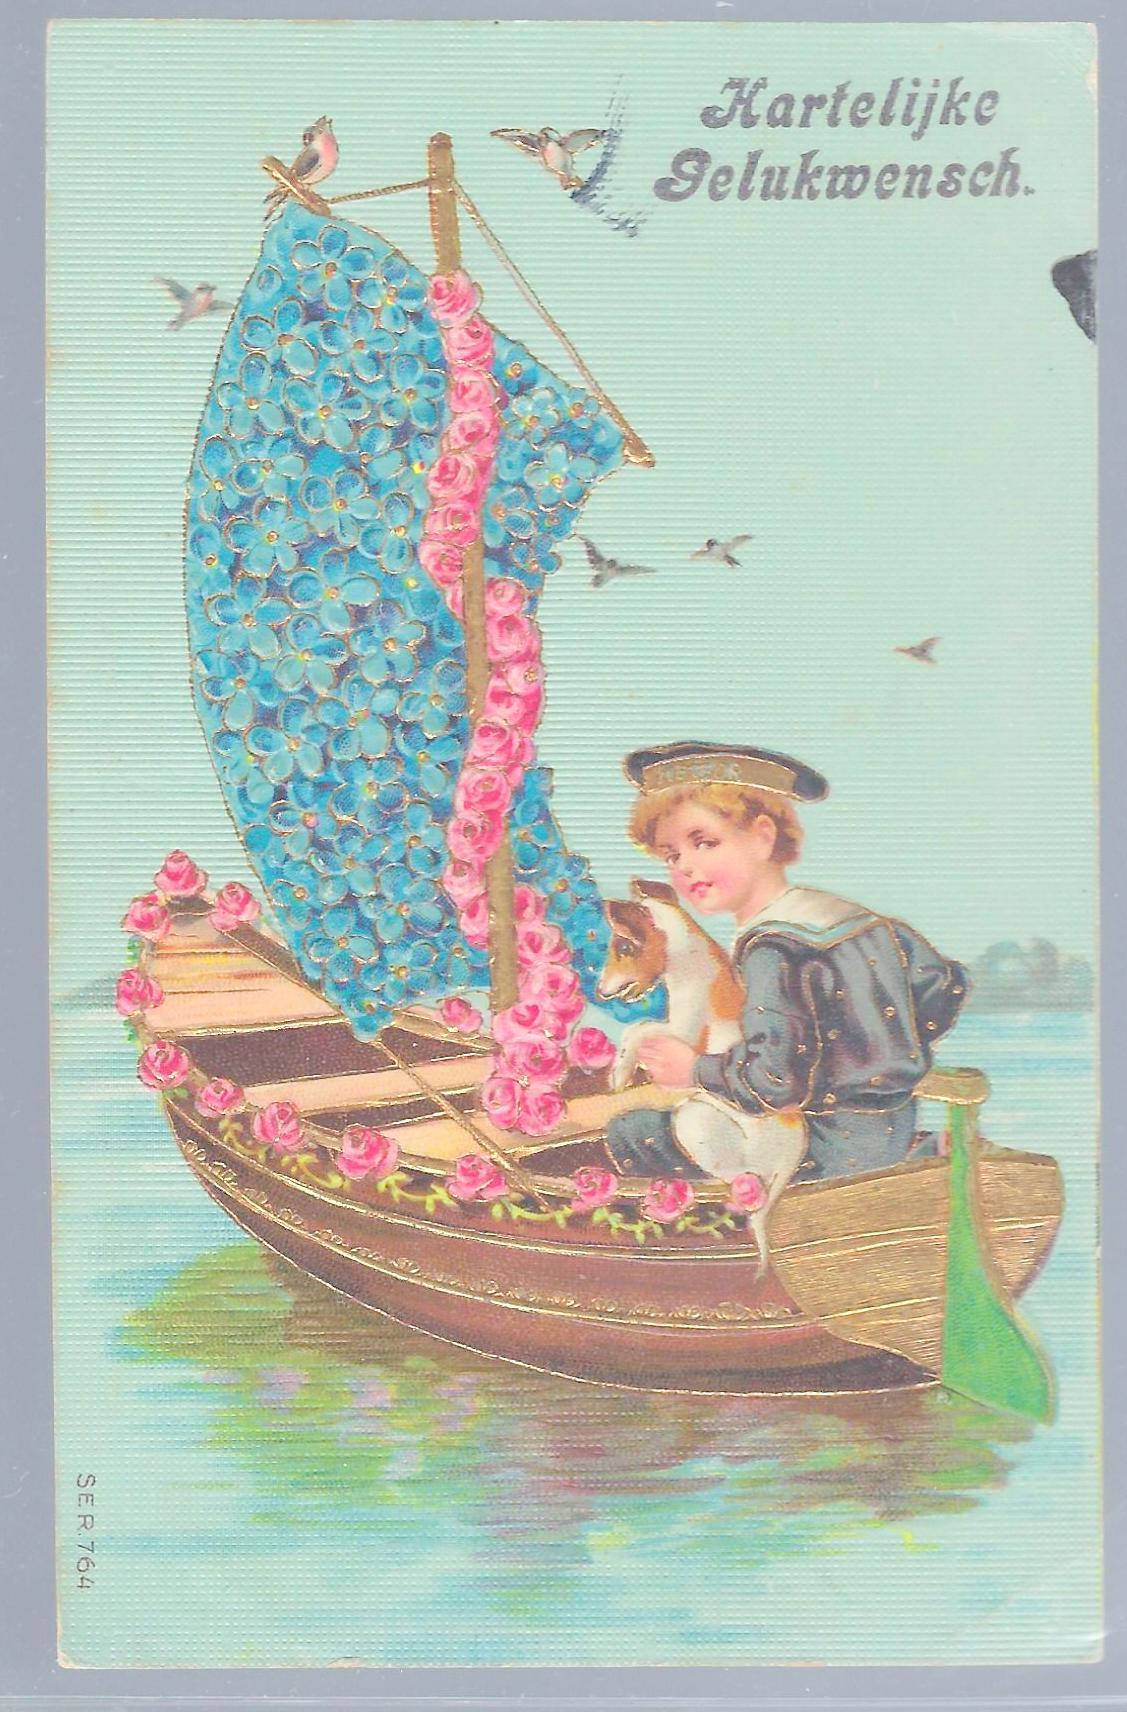 Child and Dog in Flower Covered Sailboat Gold Highlights German Euro Greetings